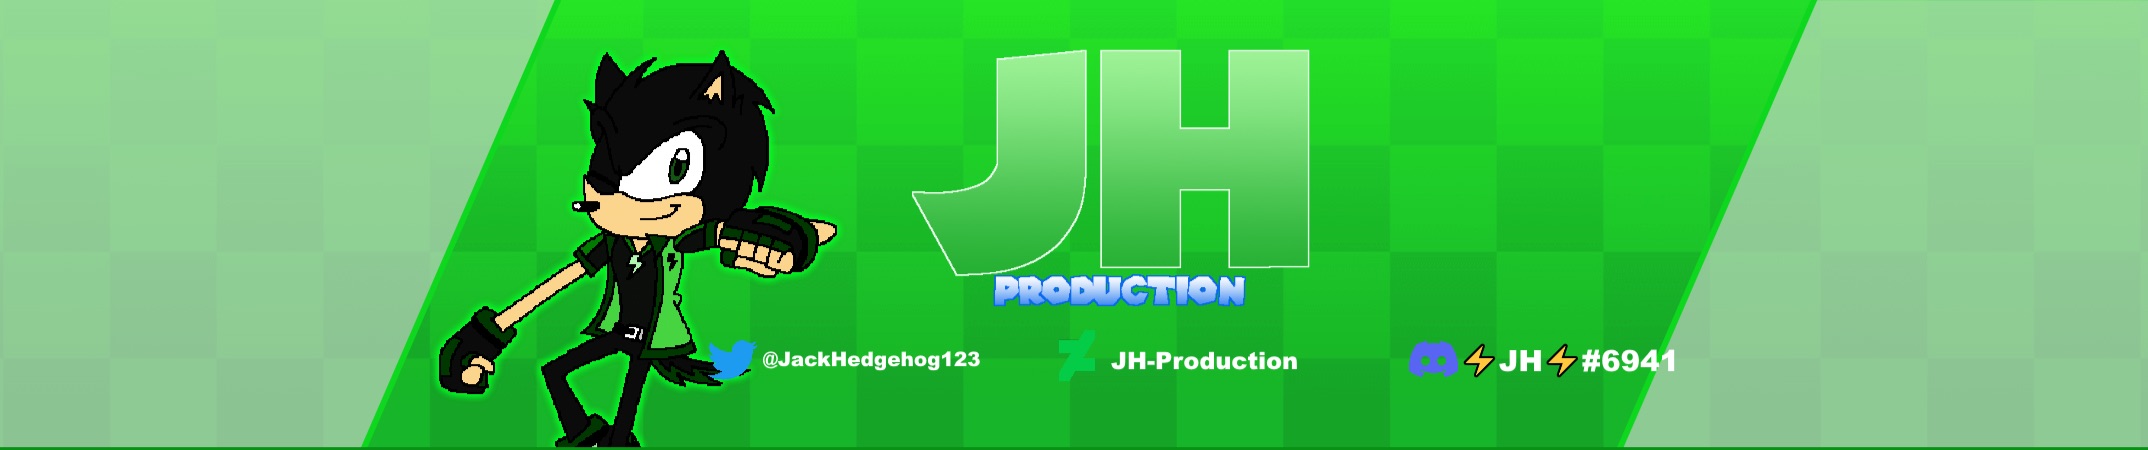 Stream JH-Production  Listen to top hits and popular tracks online for  free on SoundCloud